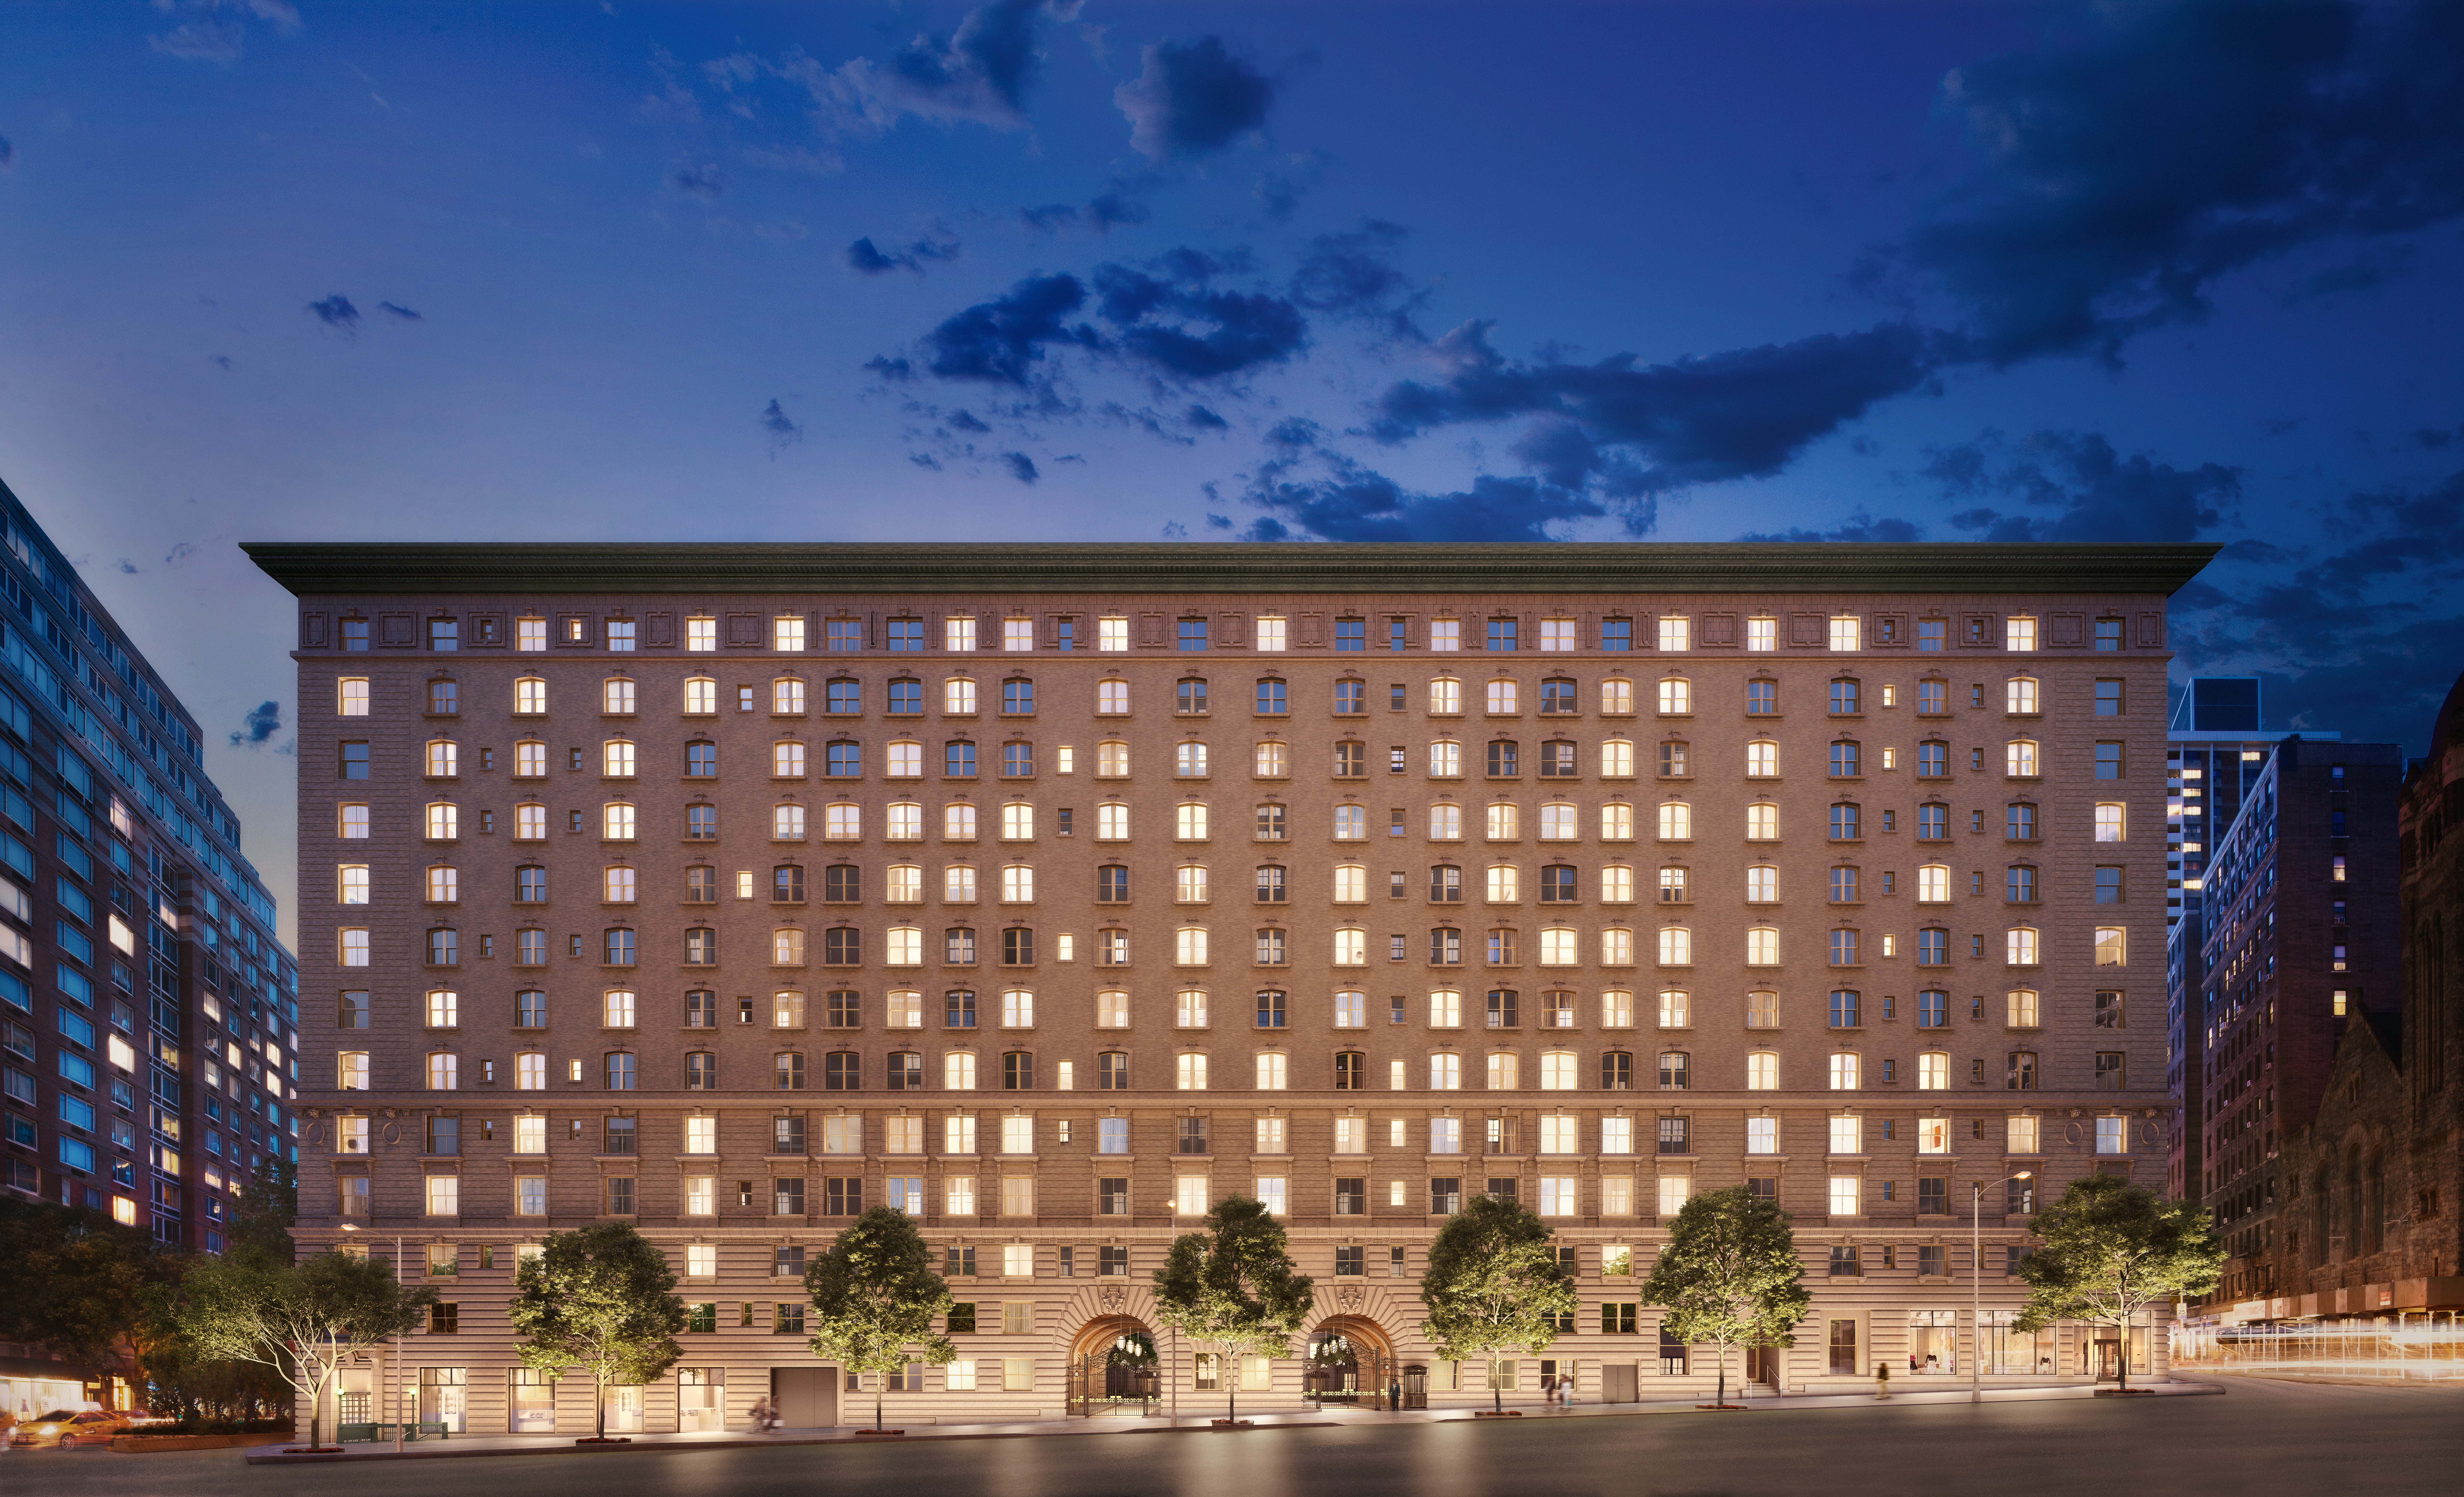 Exterior view of The Belnord apartments in New York. Large brick apartment building with lights in the windows at night.